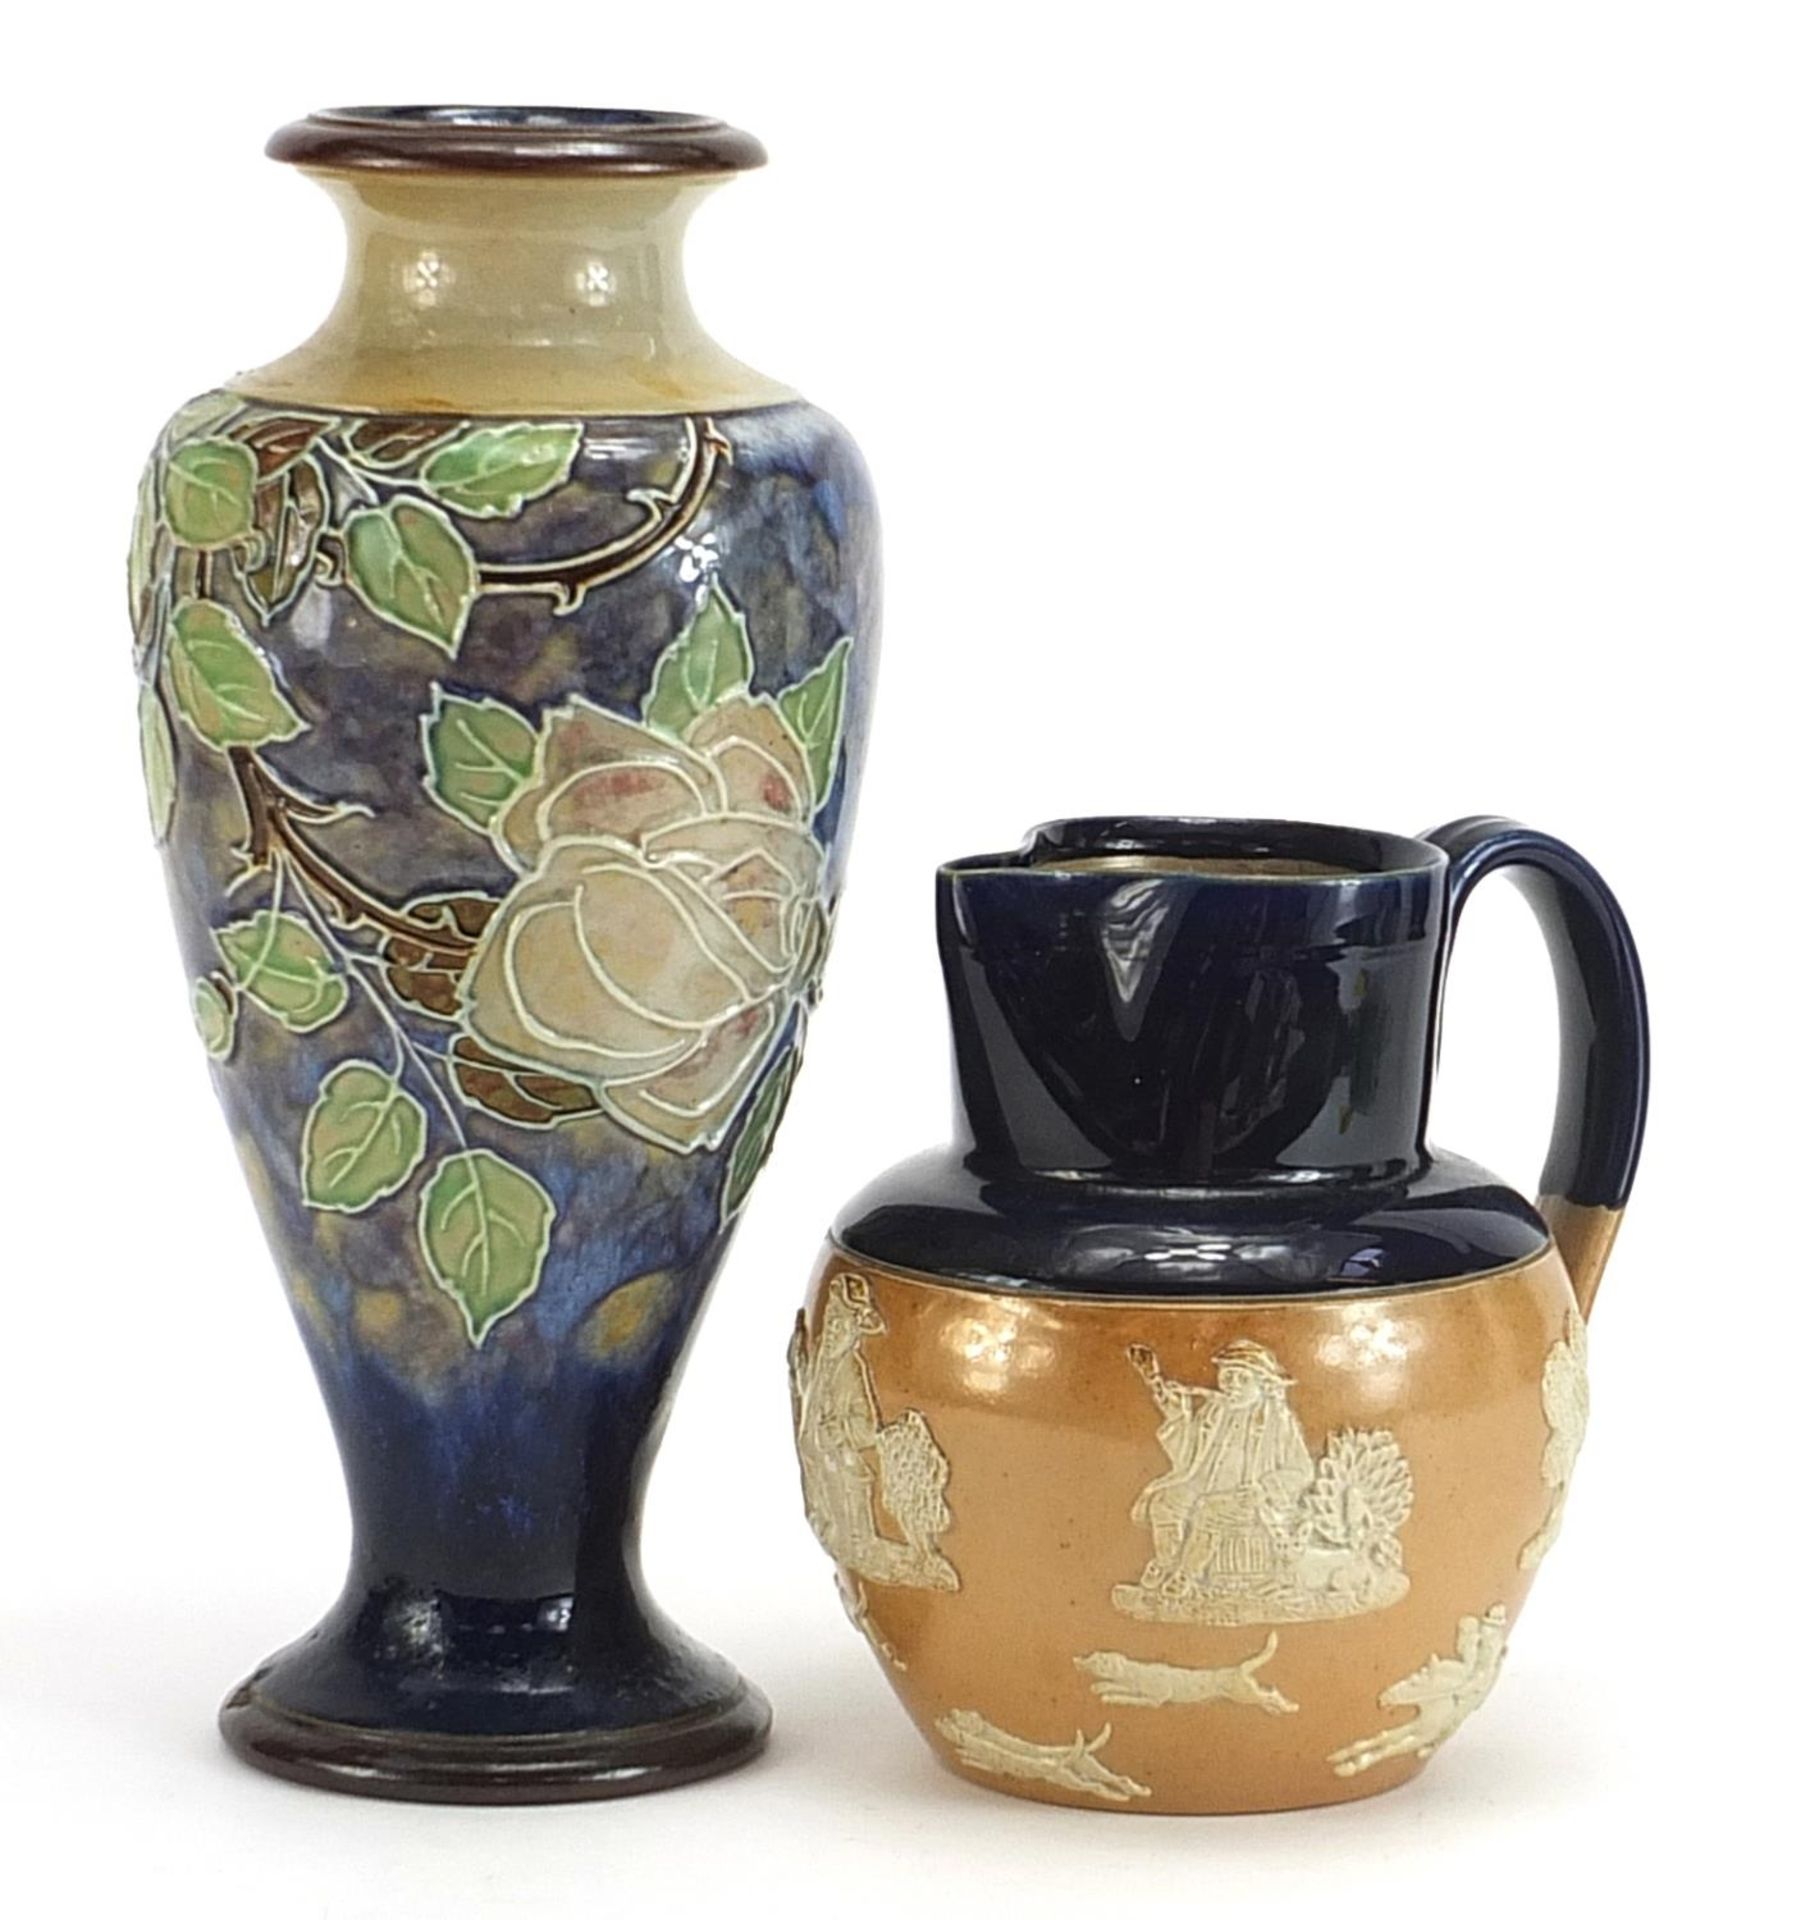 Royal Doulton baluster vase hand painted with stylised flowers and a hunting jug, the largest 29cm